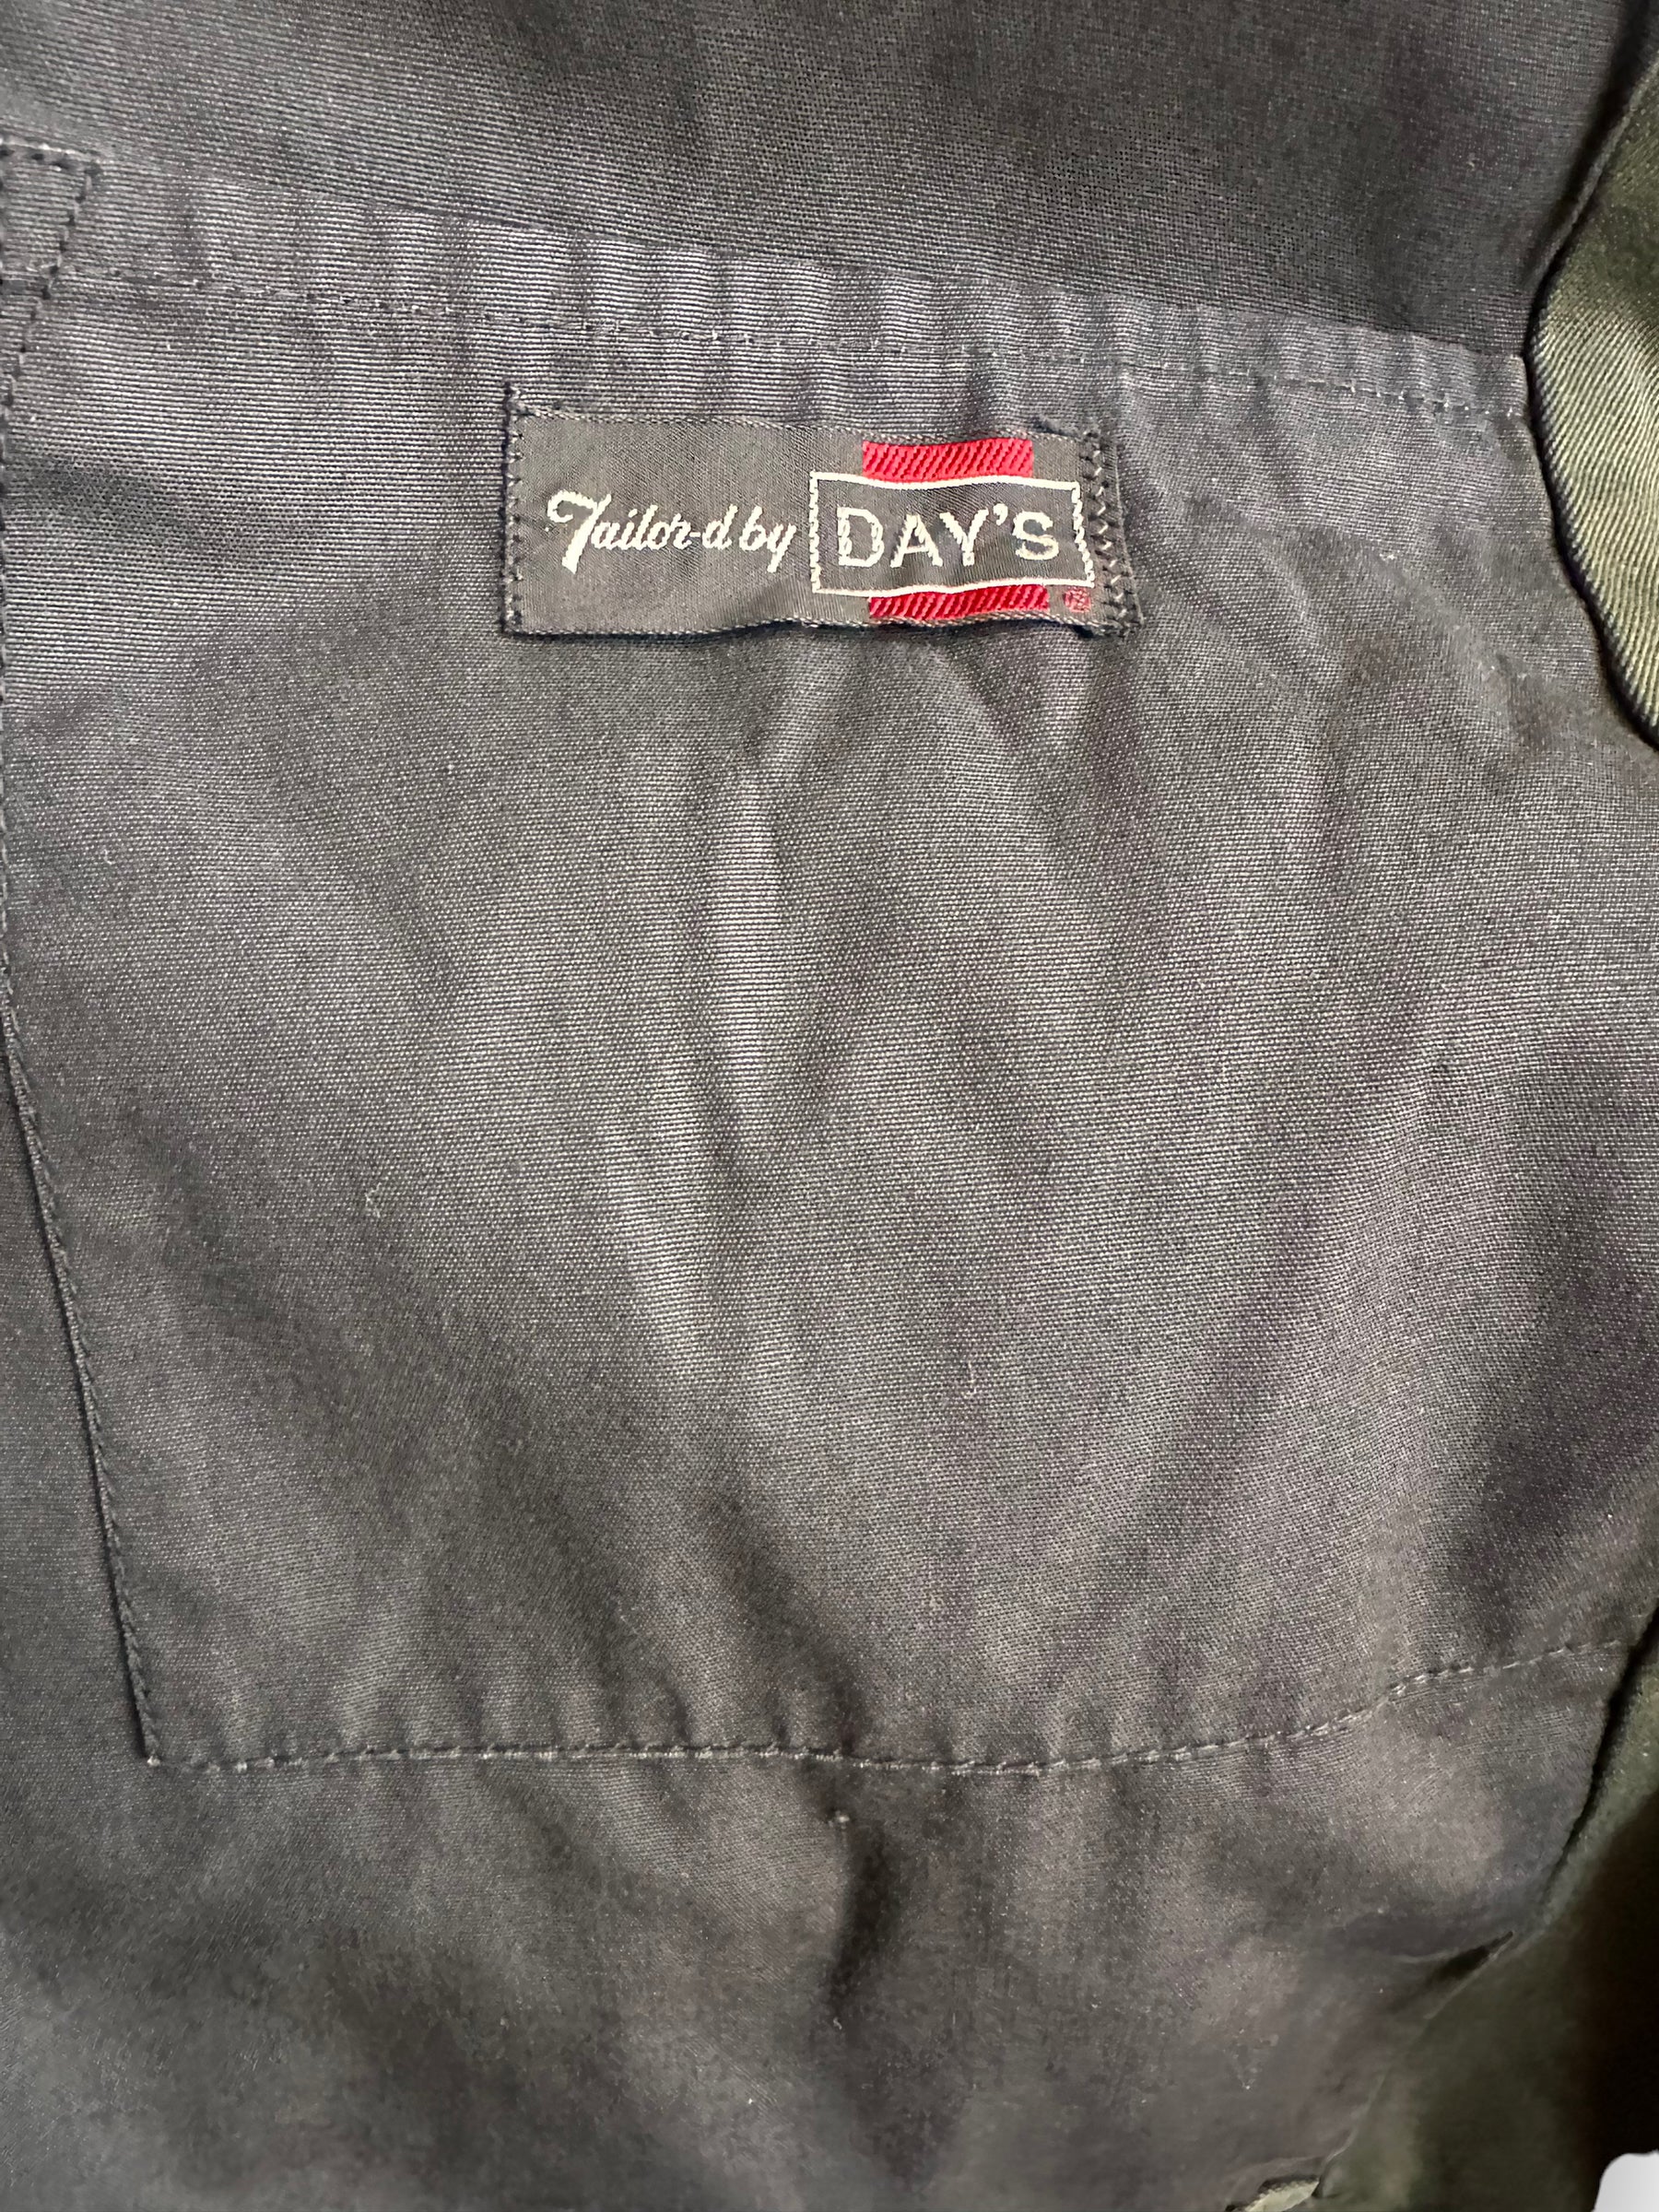 Days Tag Inside Vintage Day's Gas Station Jacket SZ 48 | Vintage Workwear Jacket Seattle | Seattle Vintage Clothing